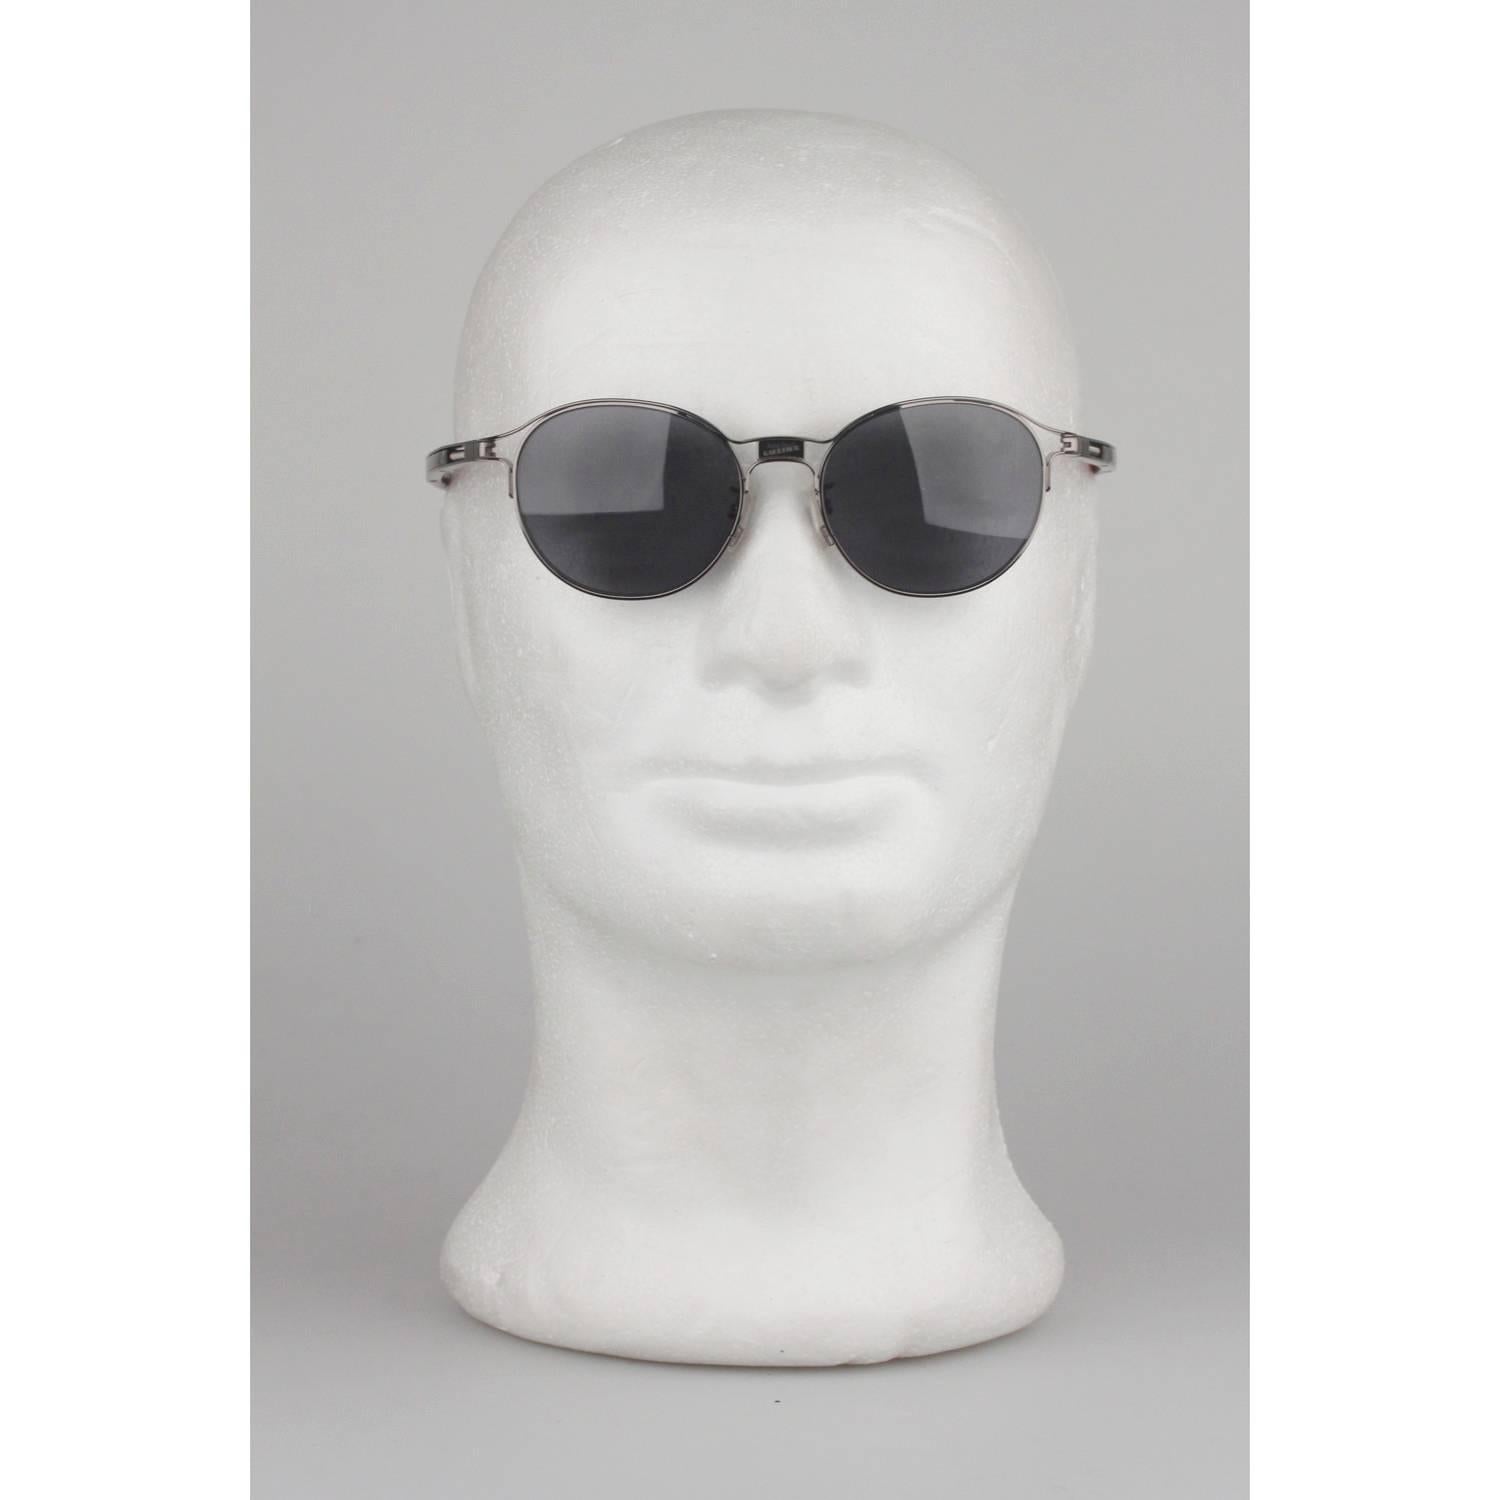 Original JEAN PAUL GAULTIER Unisex Sunglasses from 2006
Gray Metal Wrap frame, with Brown plastic arms
Blue/Smoke Gray Classic Original Gaultier 100% UV lens
Made in Italy
New Old Stock - Never Worn or Used - they will come with a GENERIC